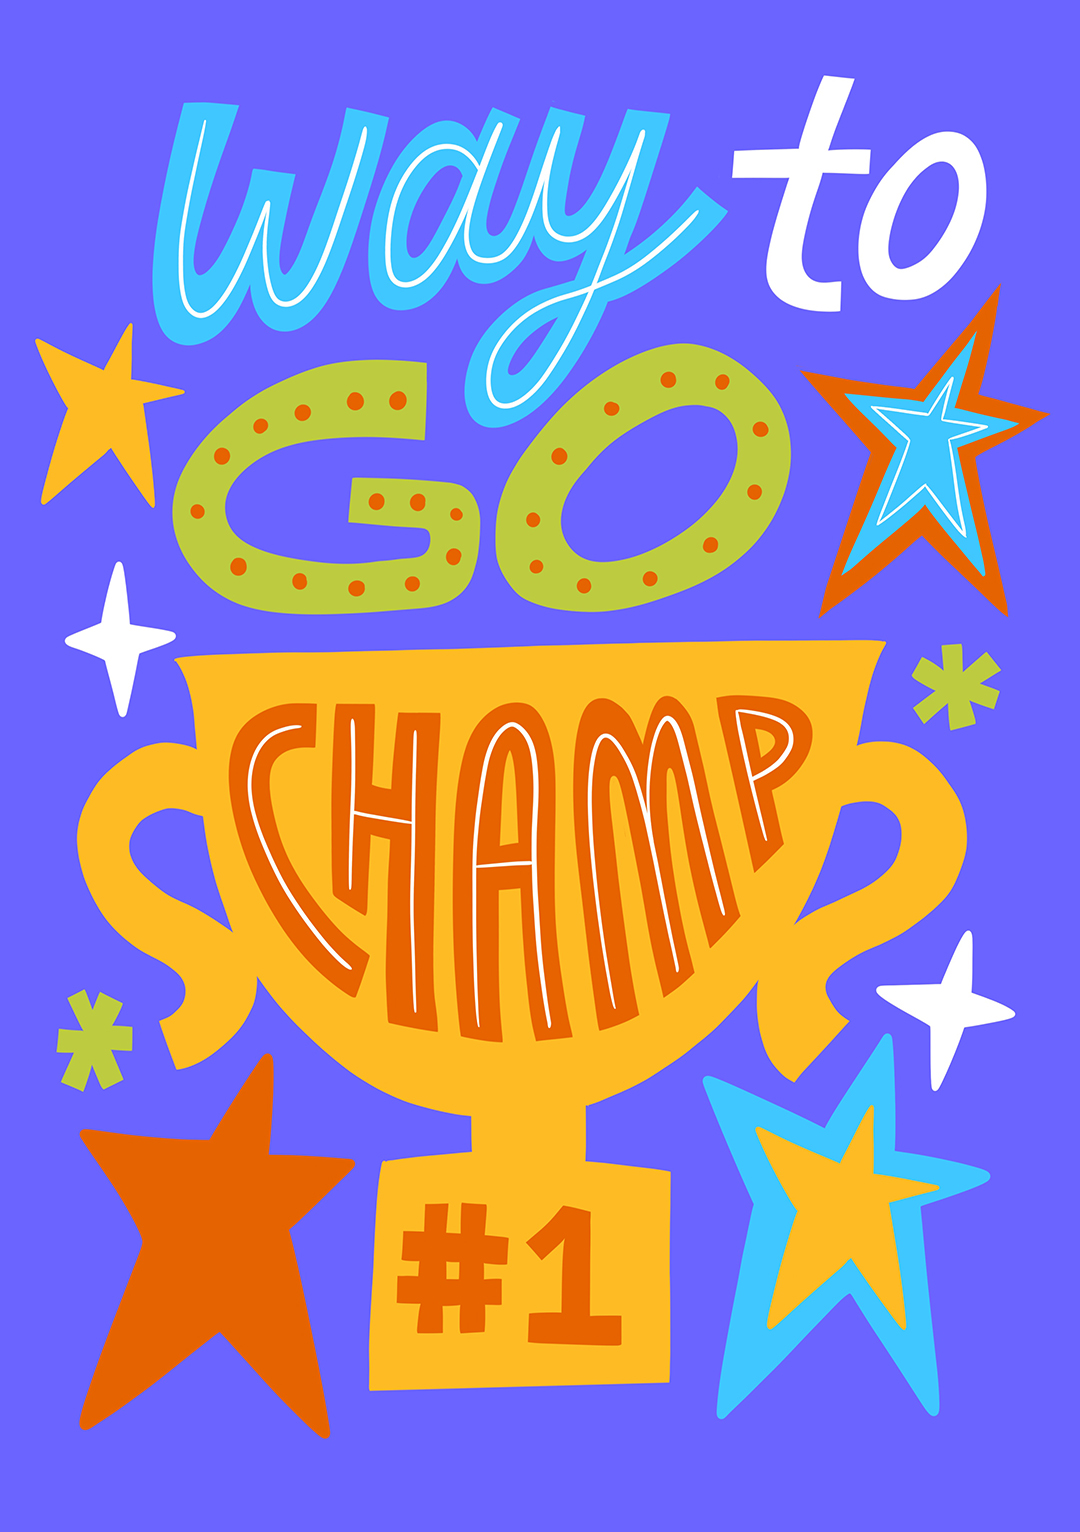 Way To Go Champ! - Greeting Card